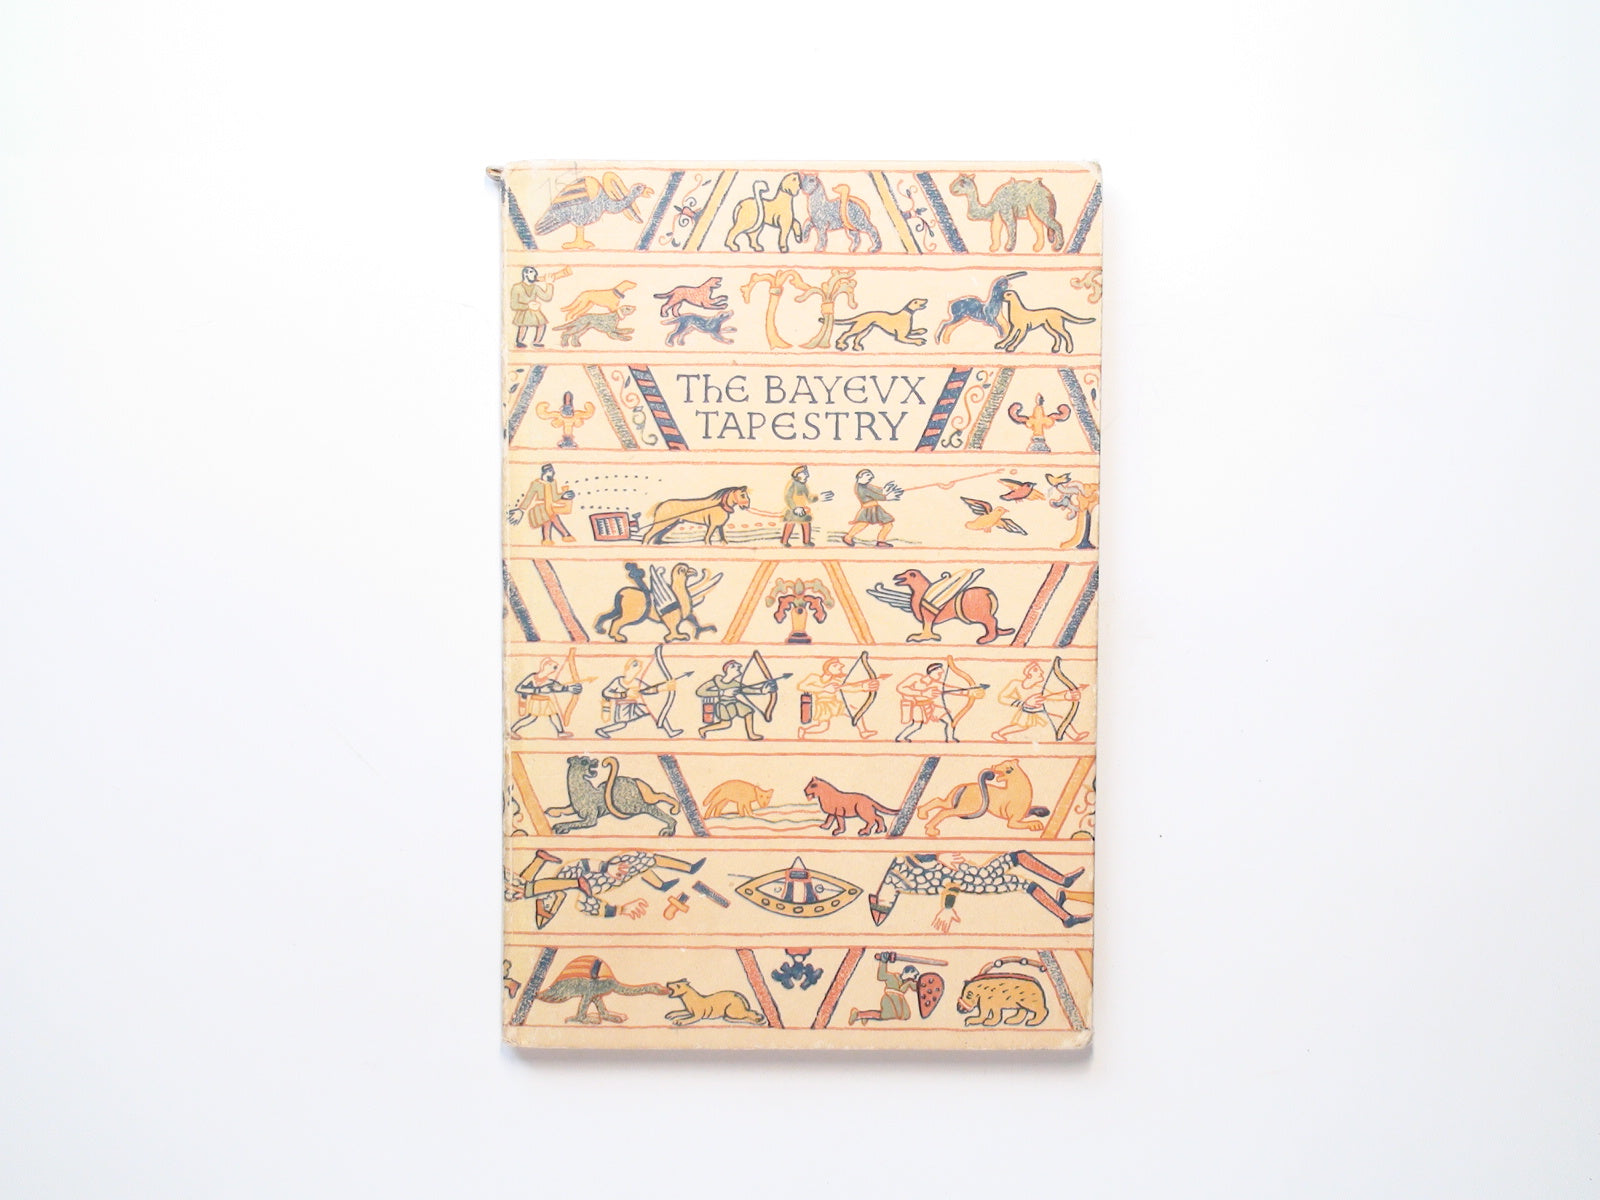 The Bayeux Tapestry by Eric Maclagan, Illustrated, Rev. Ed, 1945